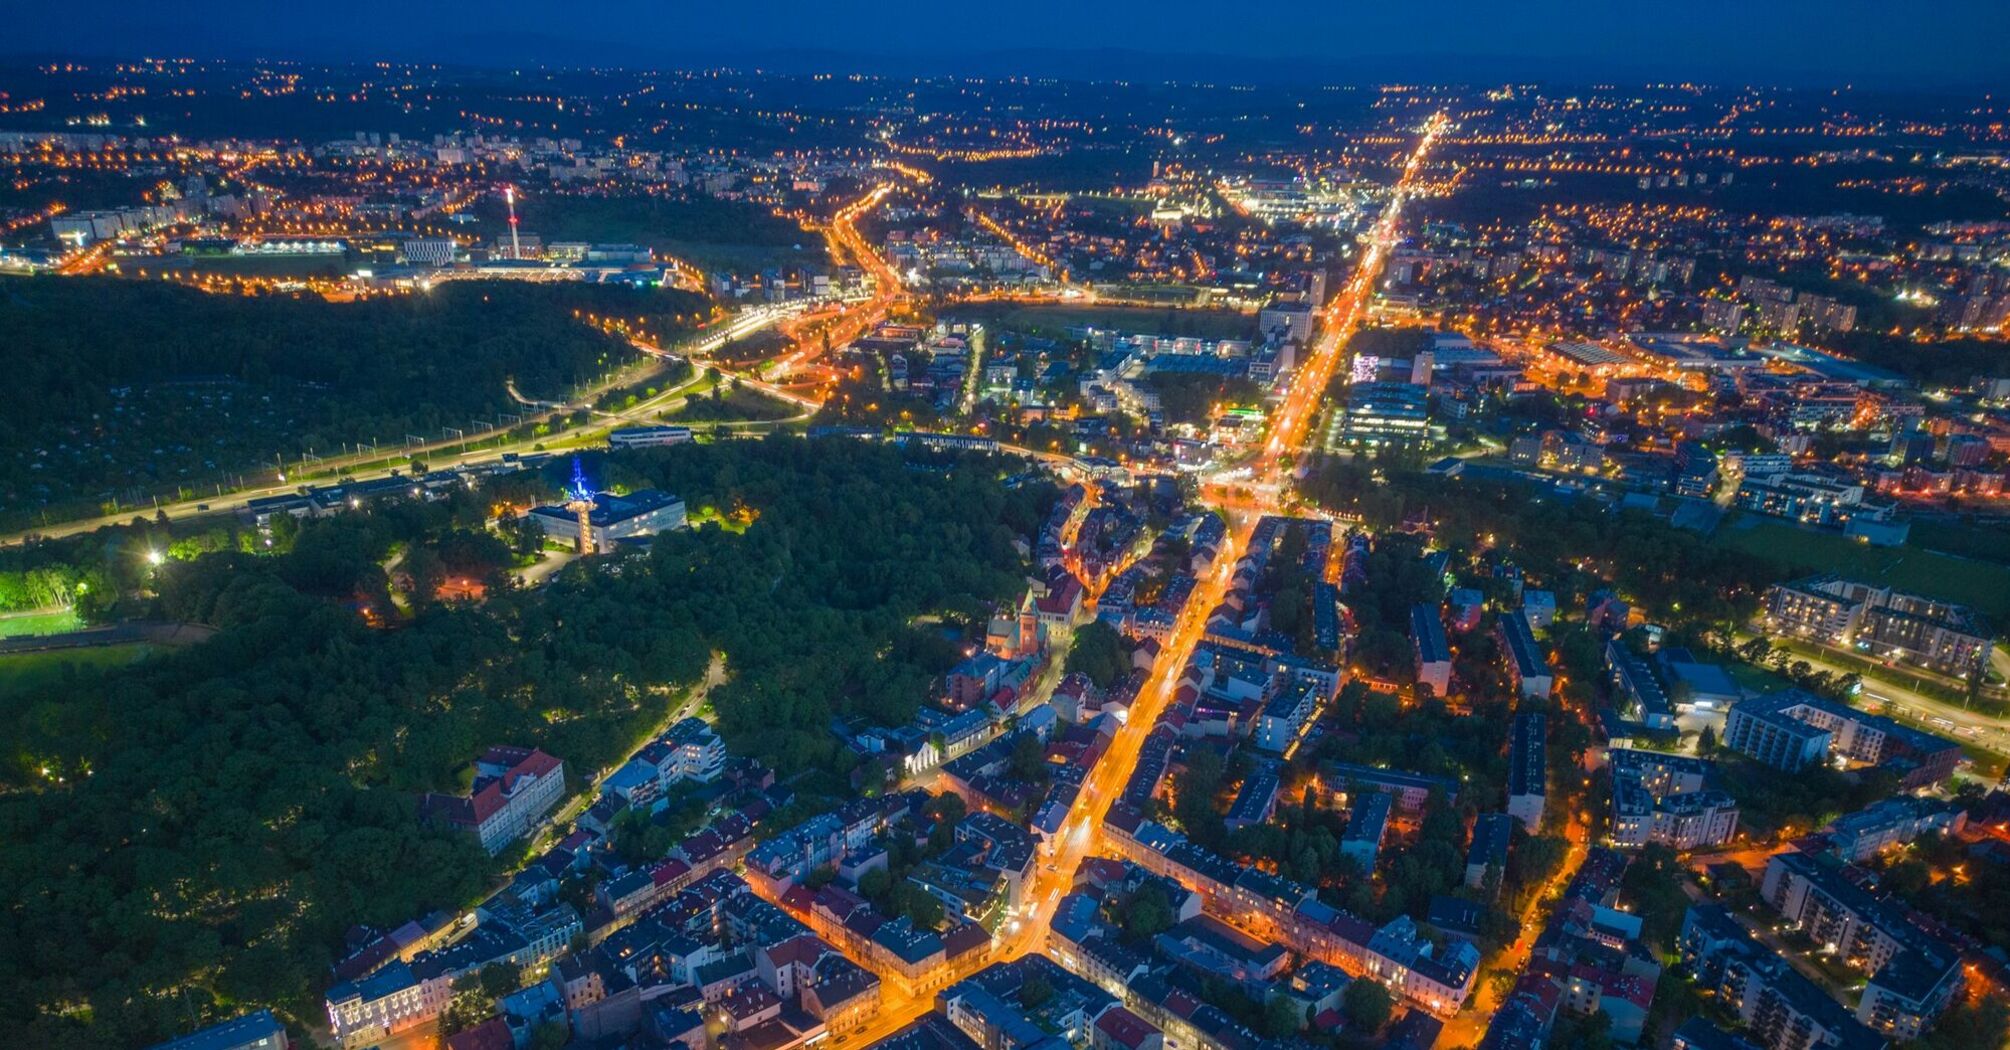 Aerial view of Krakow at night, showcasing illuminated streets and city layout